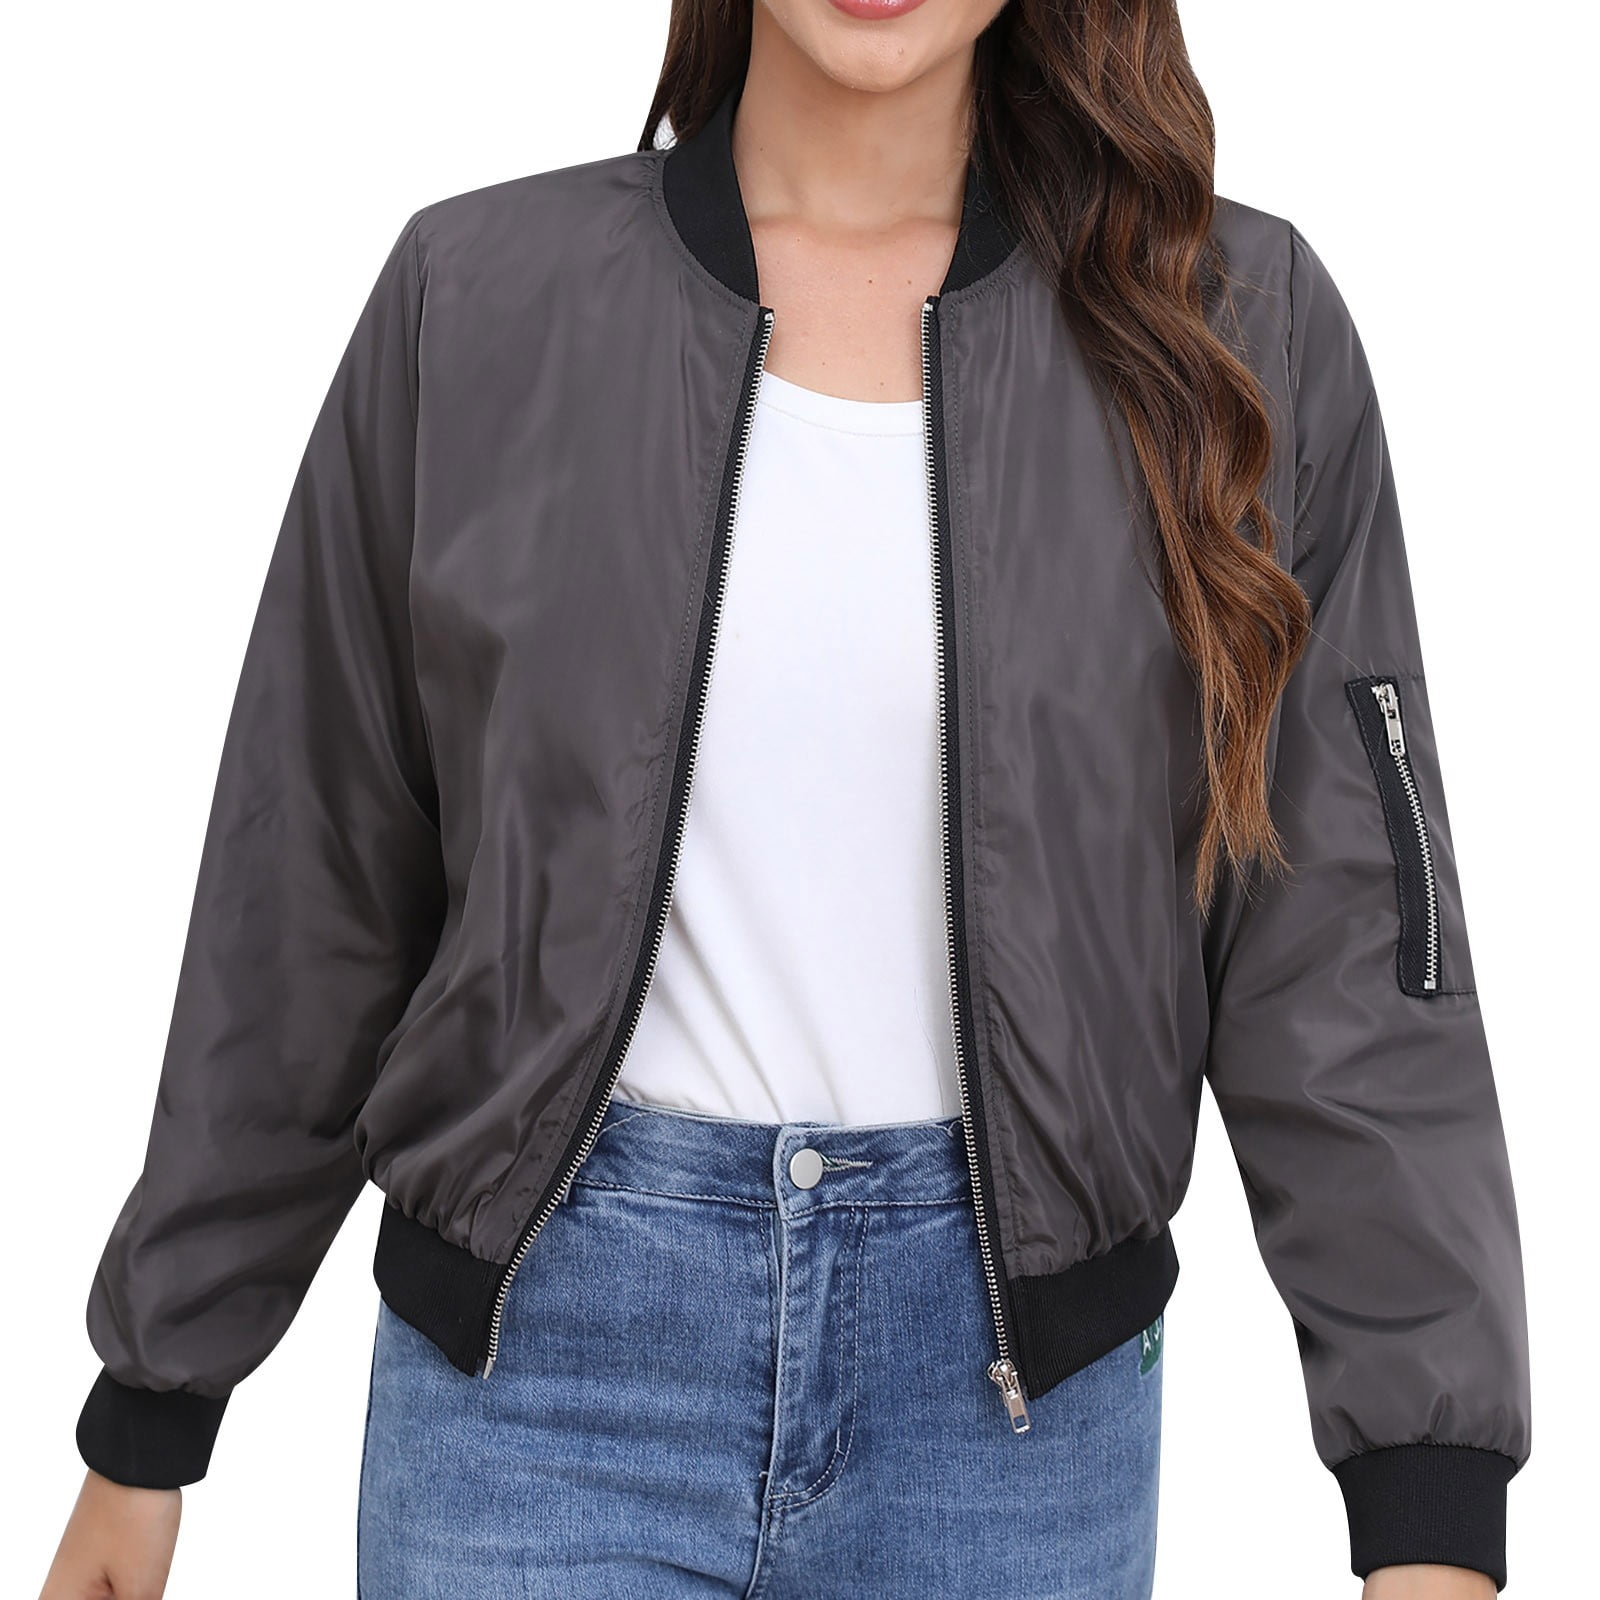 Baberdicy Lady Jacket Womens Jacket Spring Casual Jackets Lightweight ...